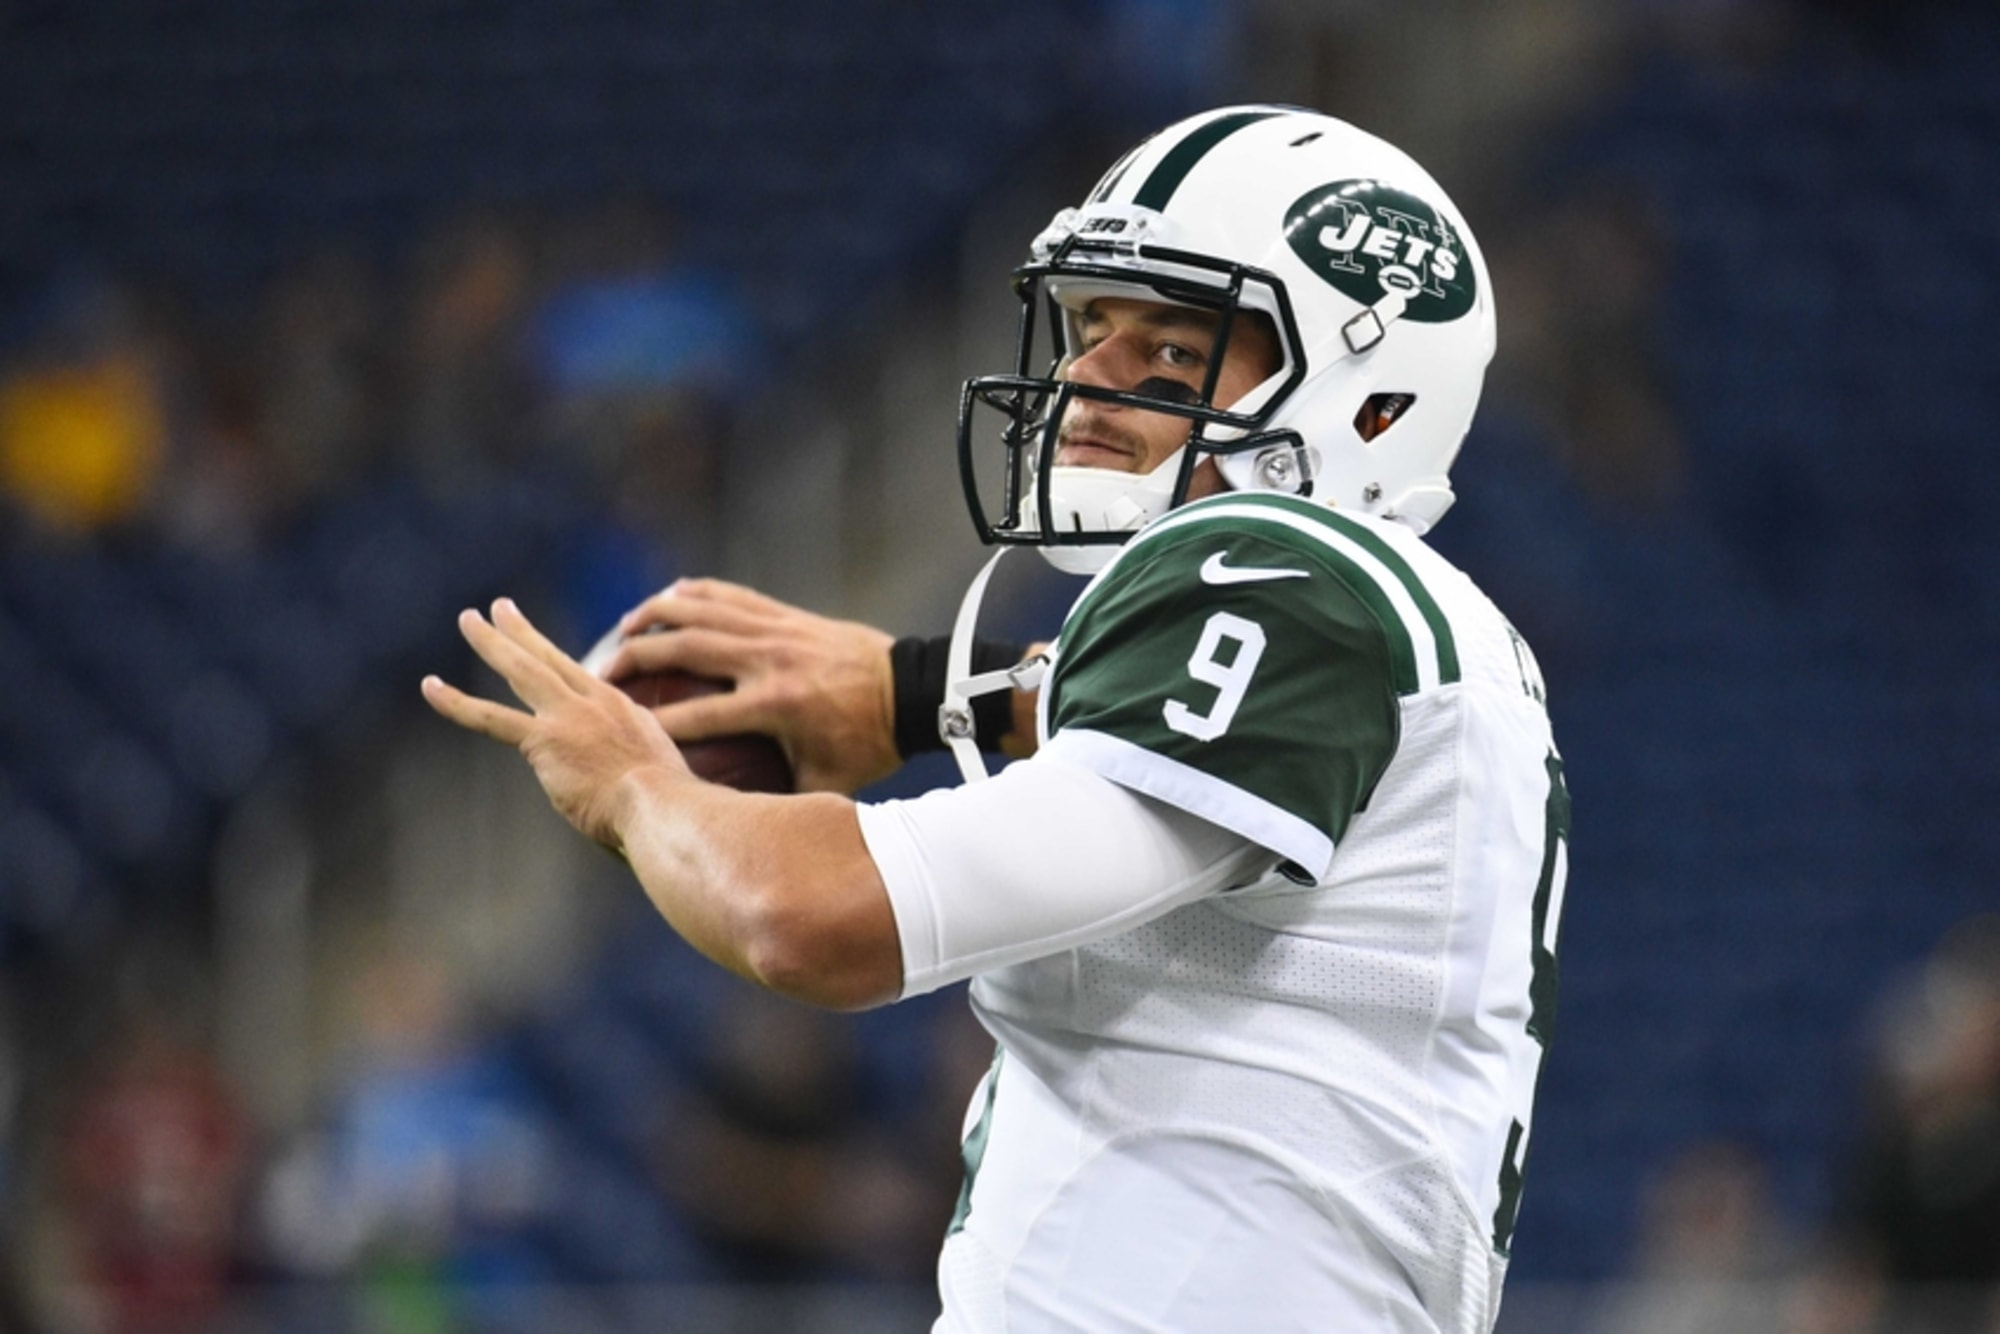 NY Jets Team must develop a quarterback for the future